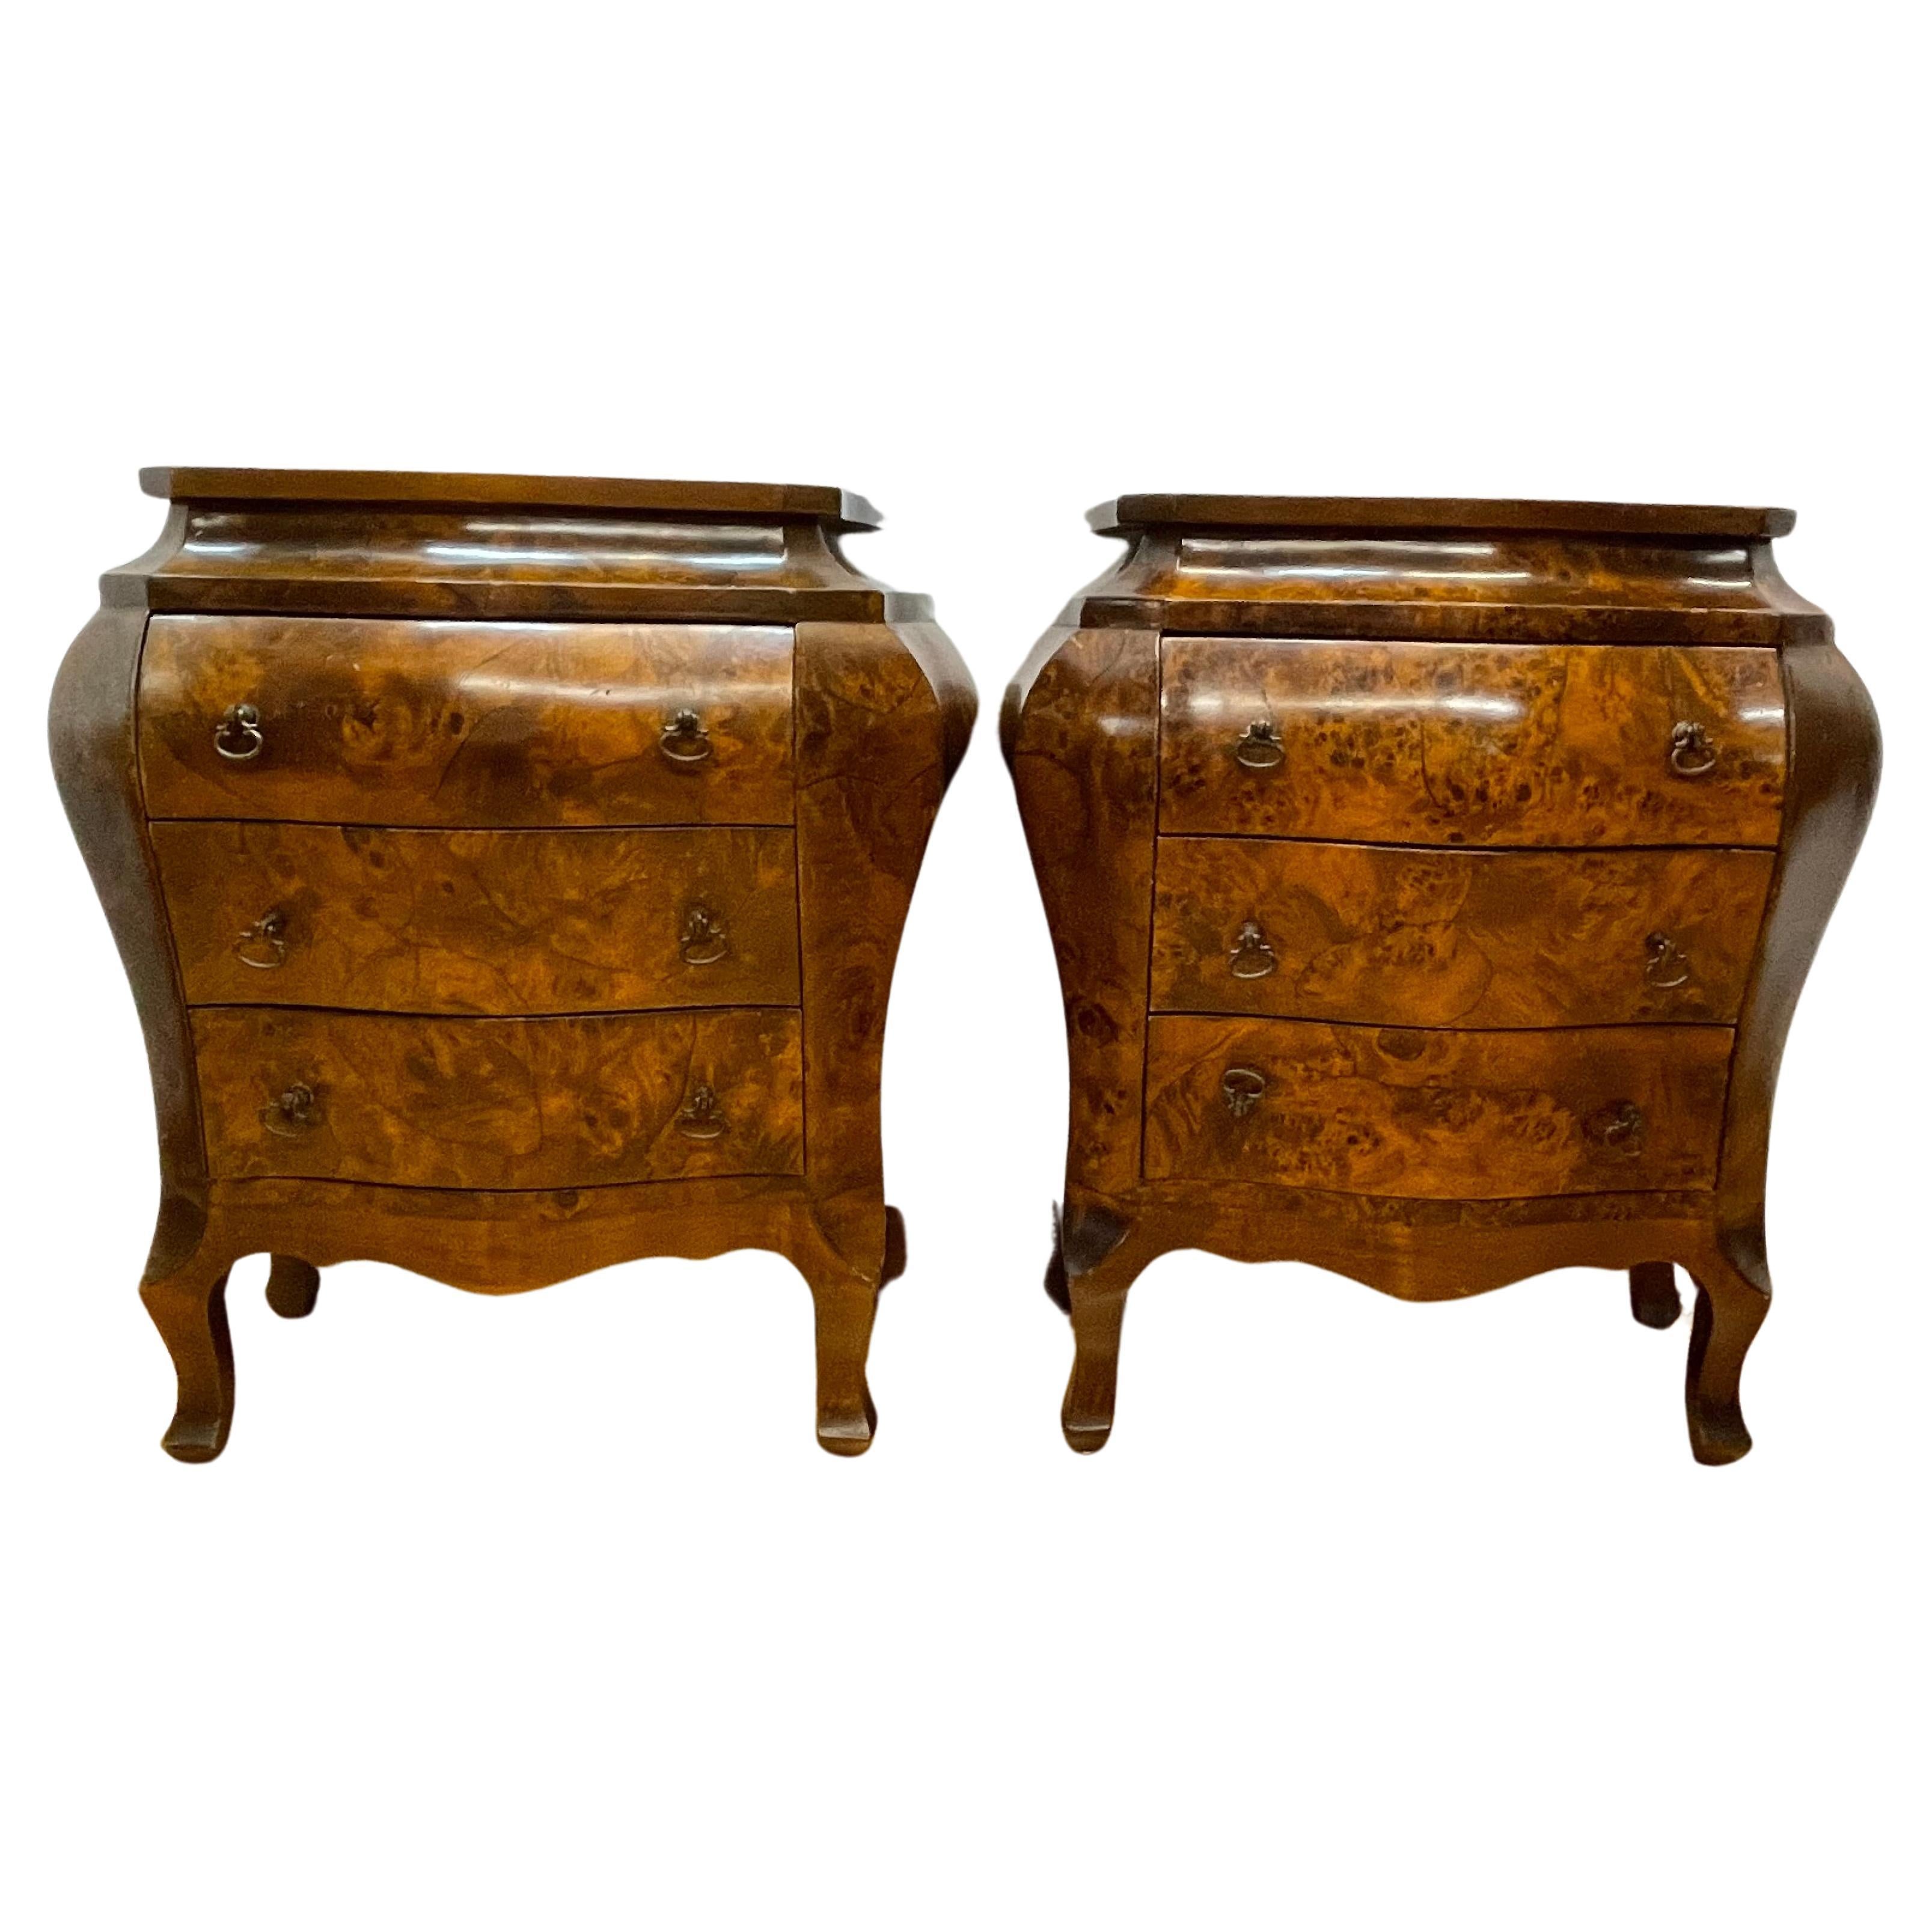 Pair of three draw bombe commodes marked Italy with a maple burled veneer For Sale